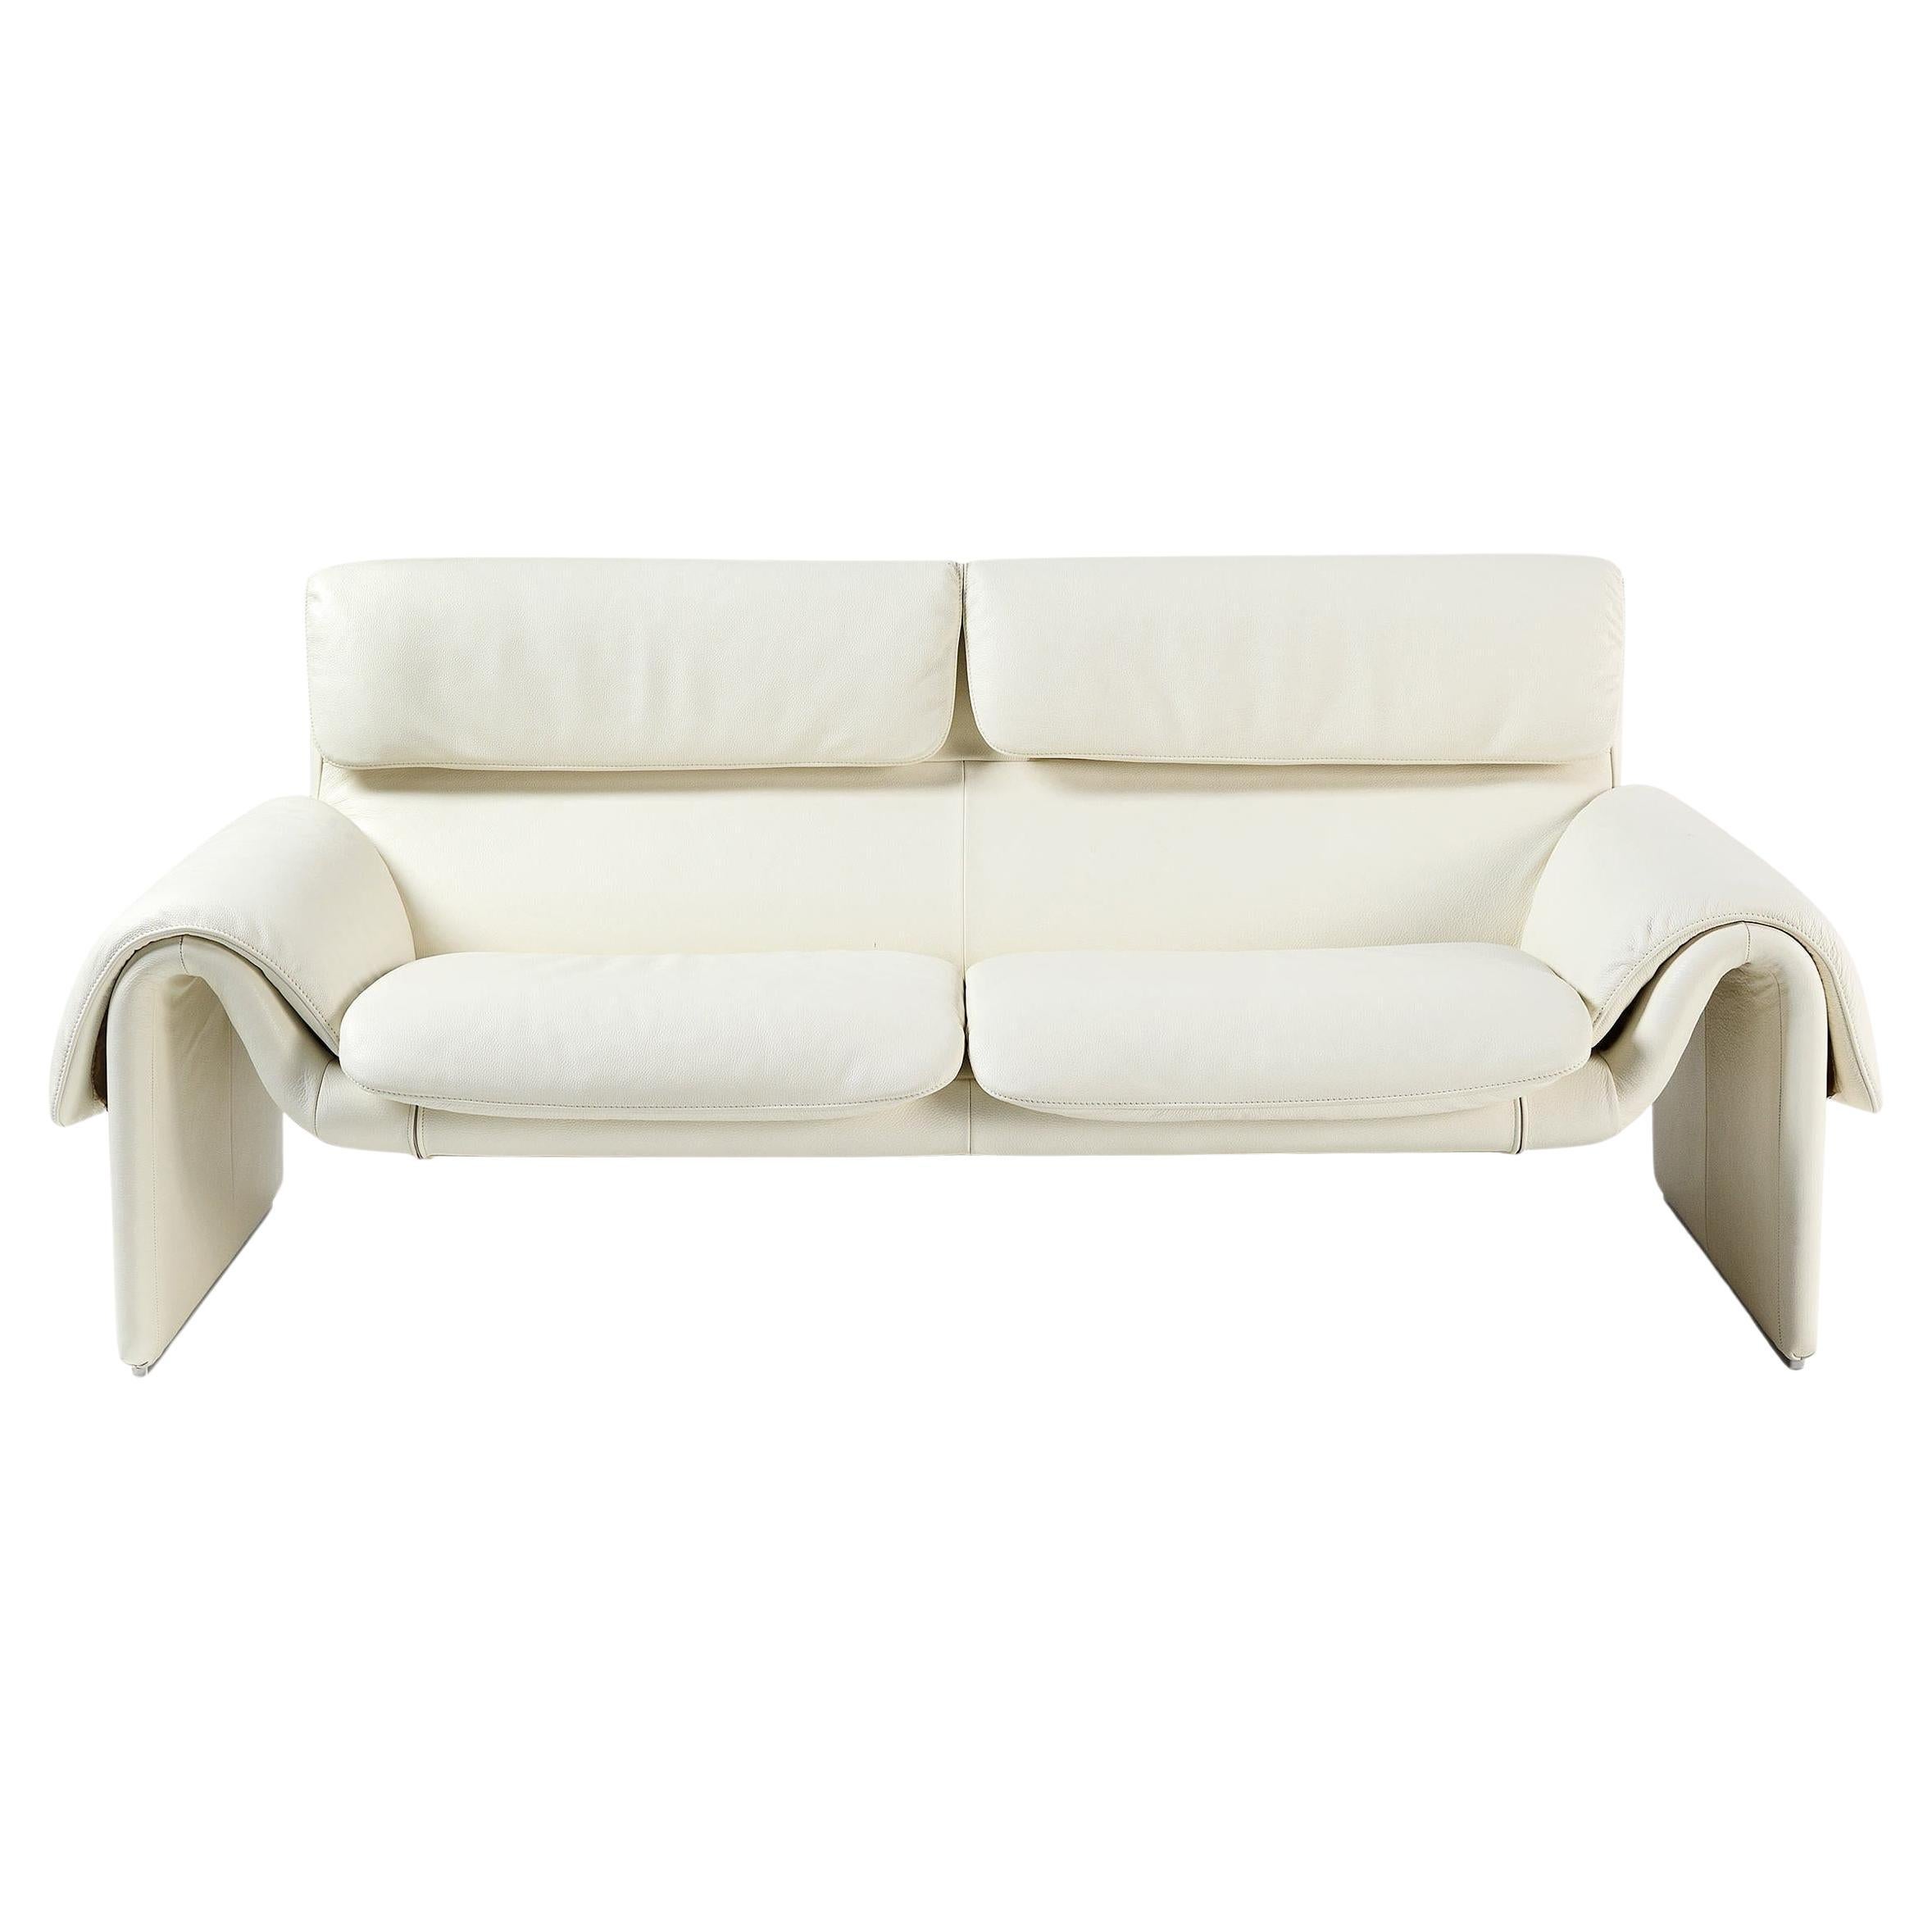 De Sede DS-2011 Two-Seater Sofa in Snow Upholstery by De Sede Design Team